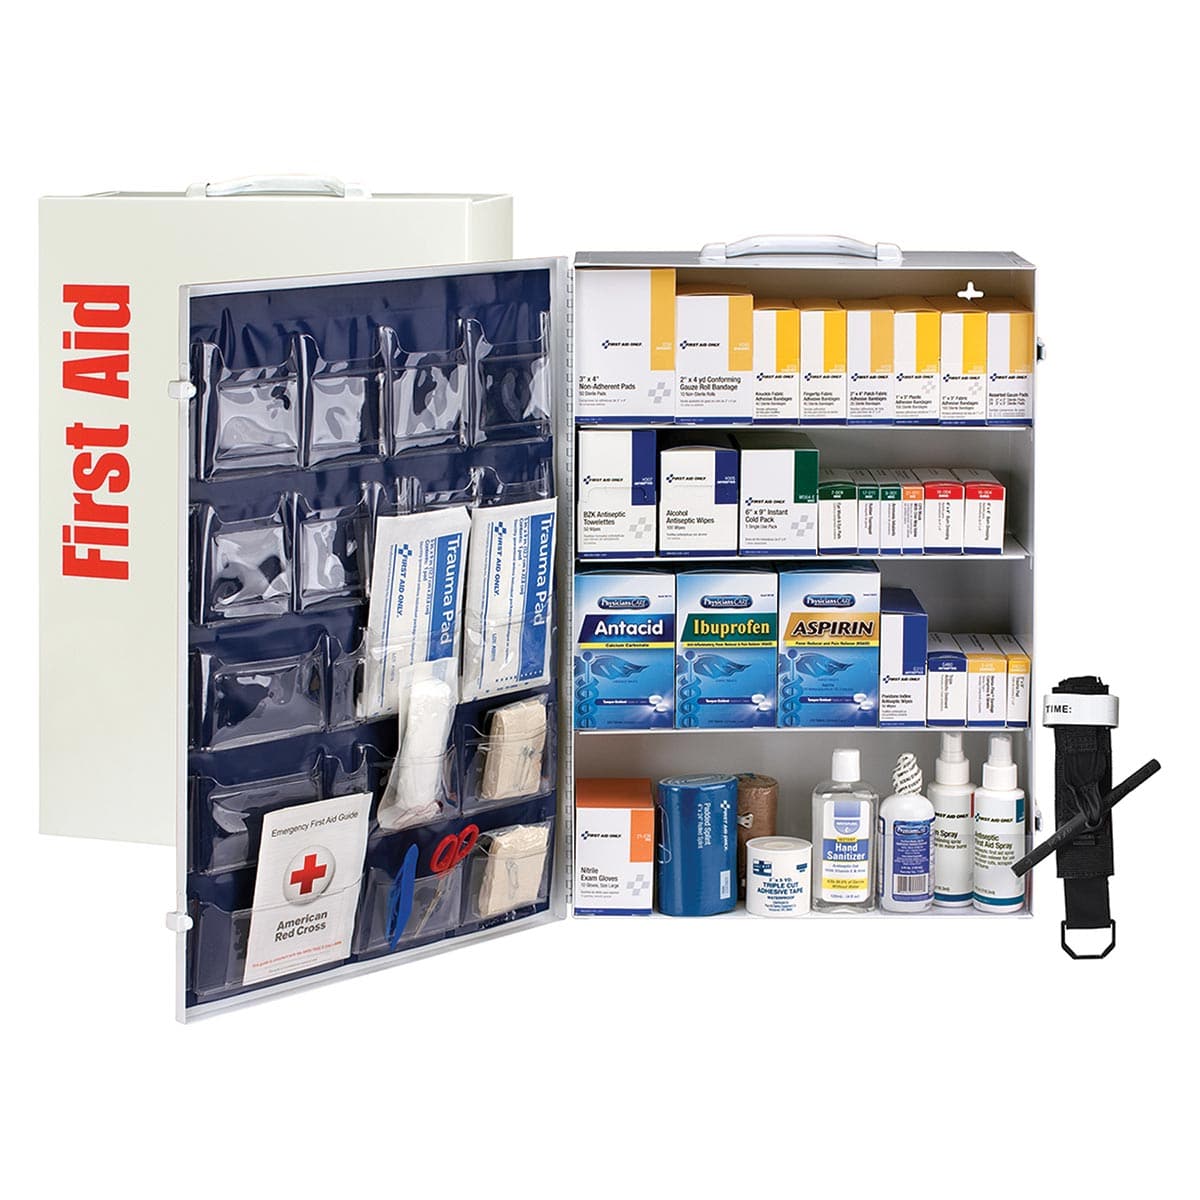 First Aid Only 150 Person ANSI B 4 Shelf First Aid Cabinet